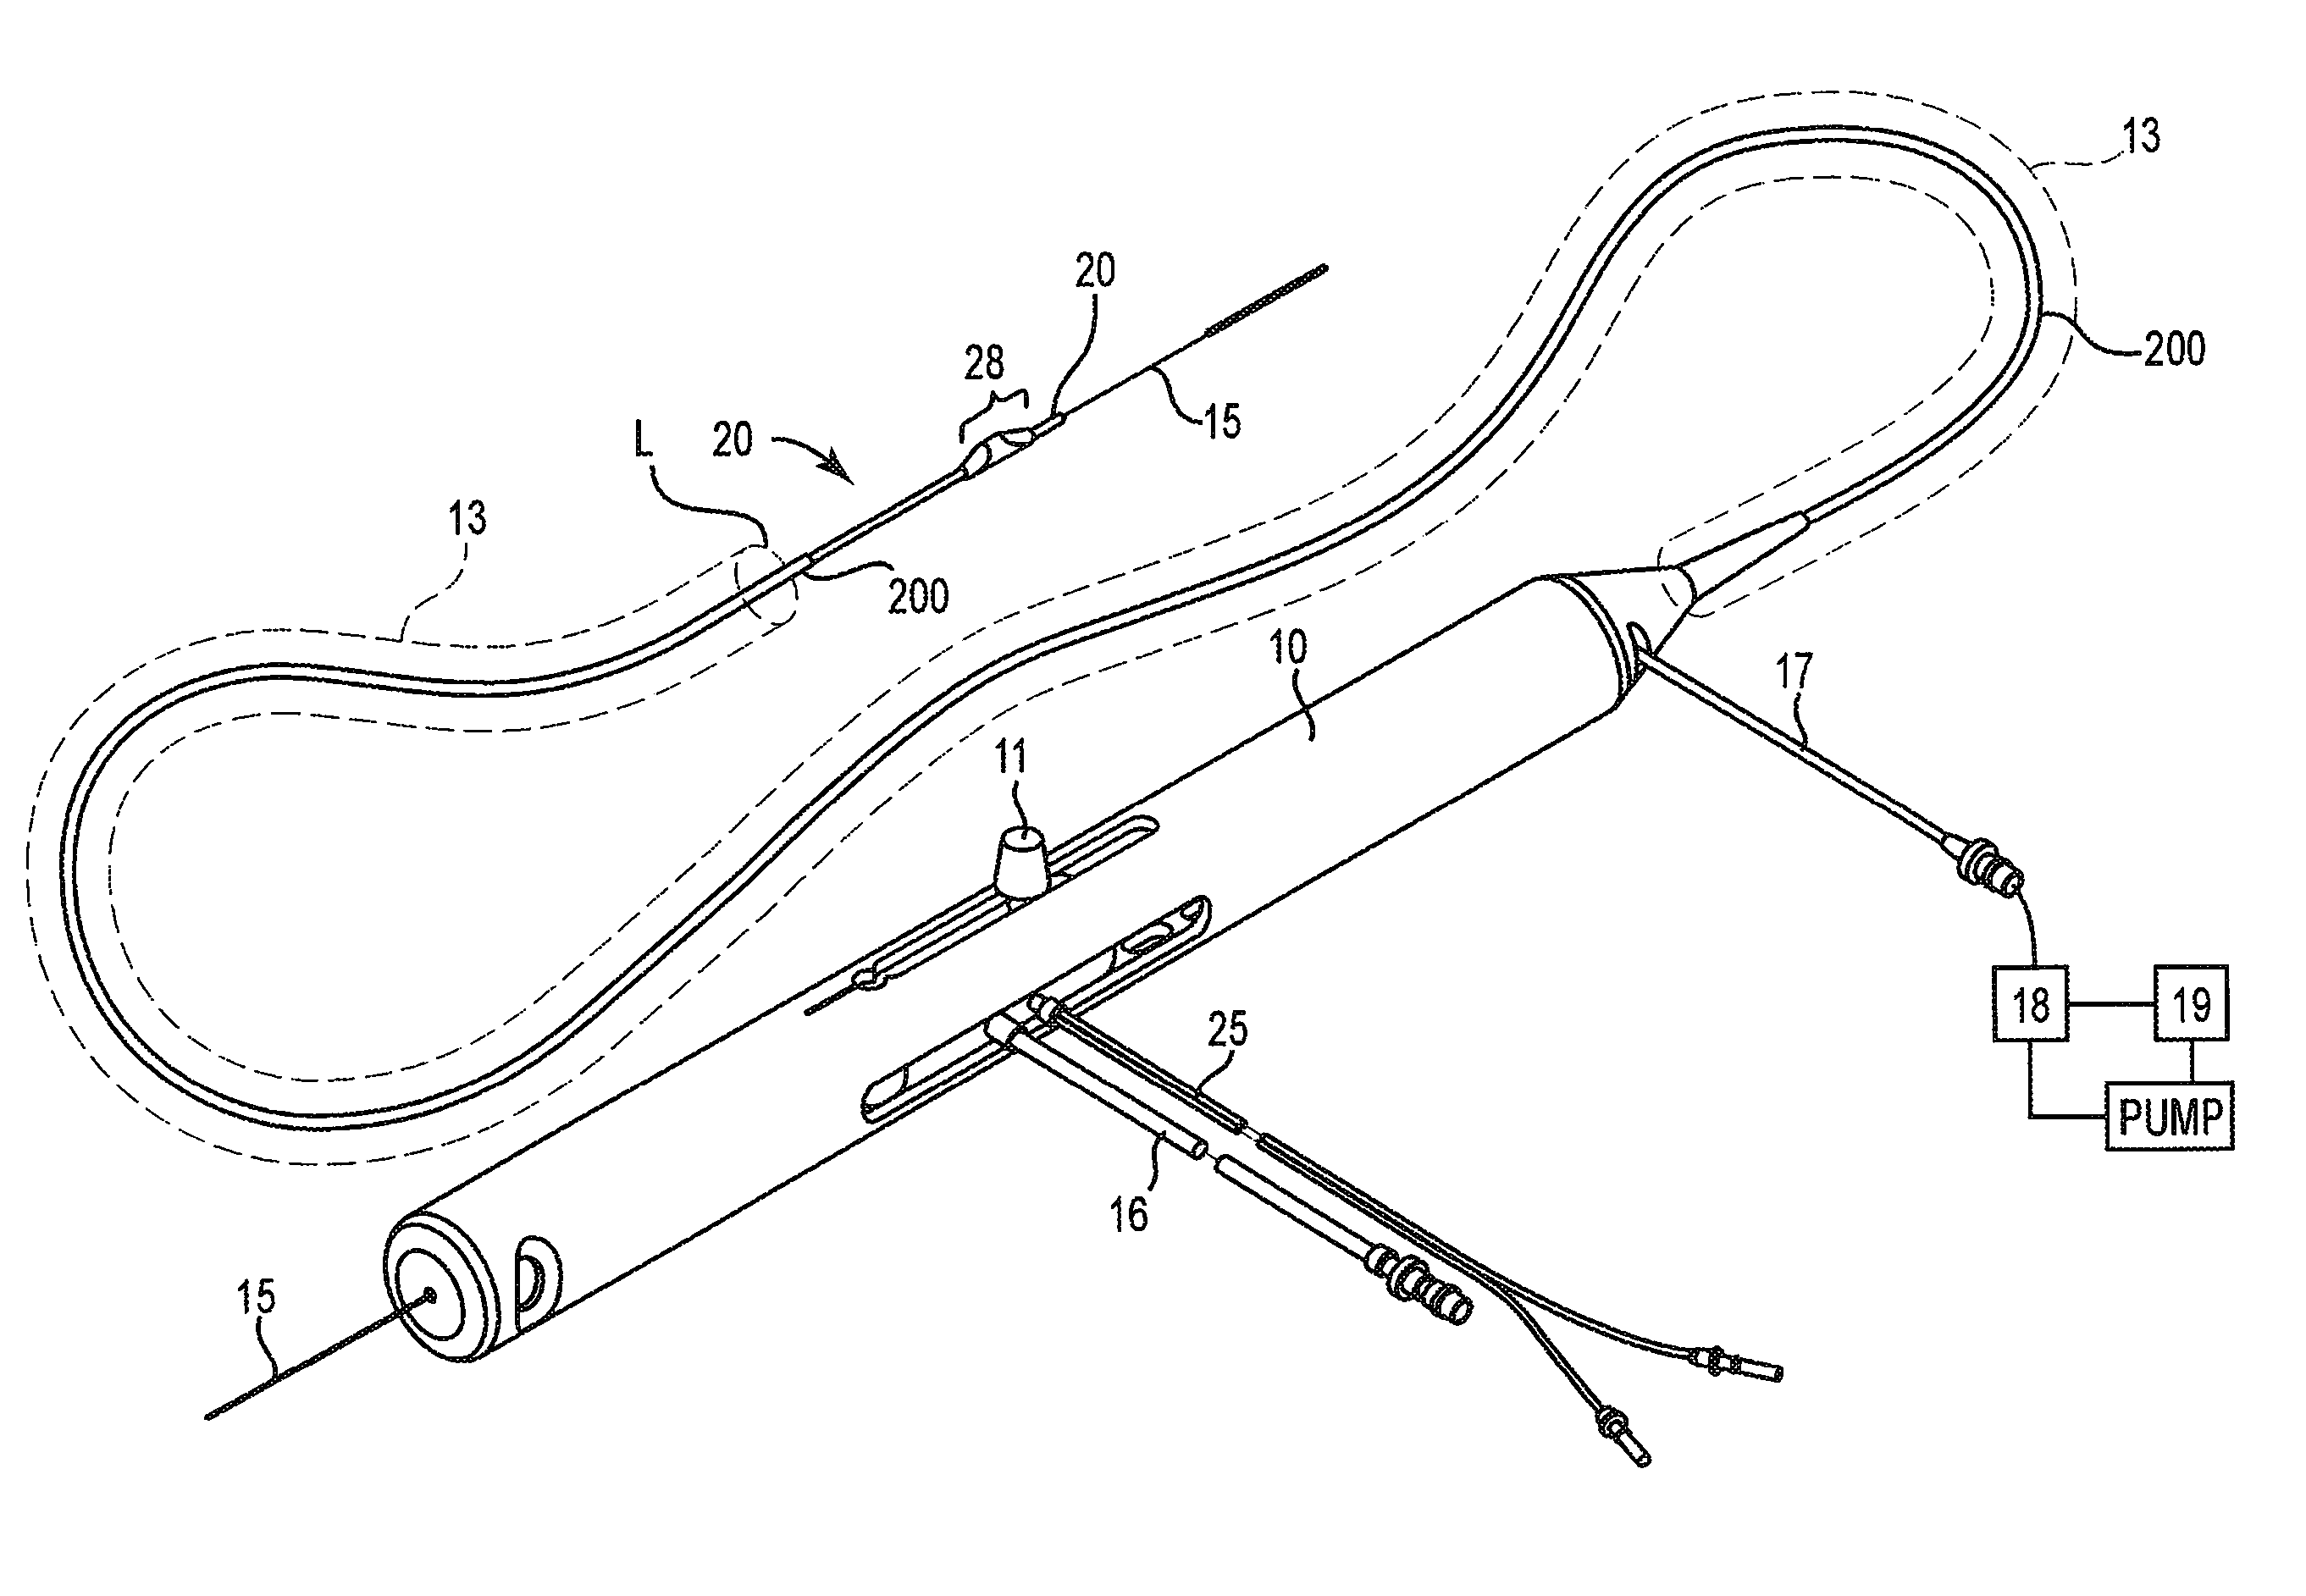 High-speed rotational atherectomy system, device and method for localized application of therapeutic agents to a biological conduit